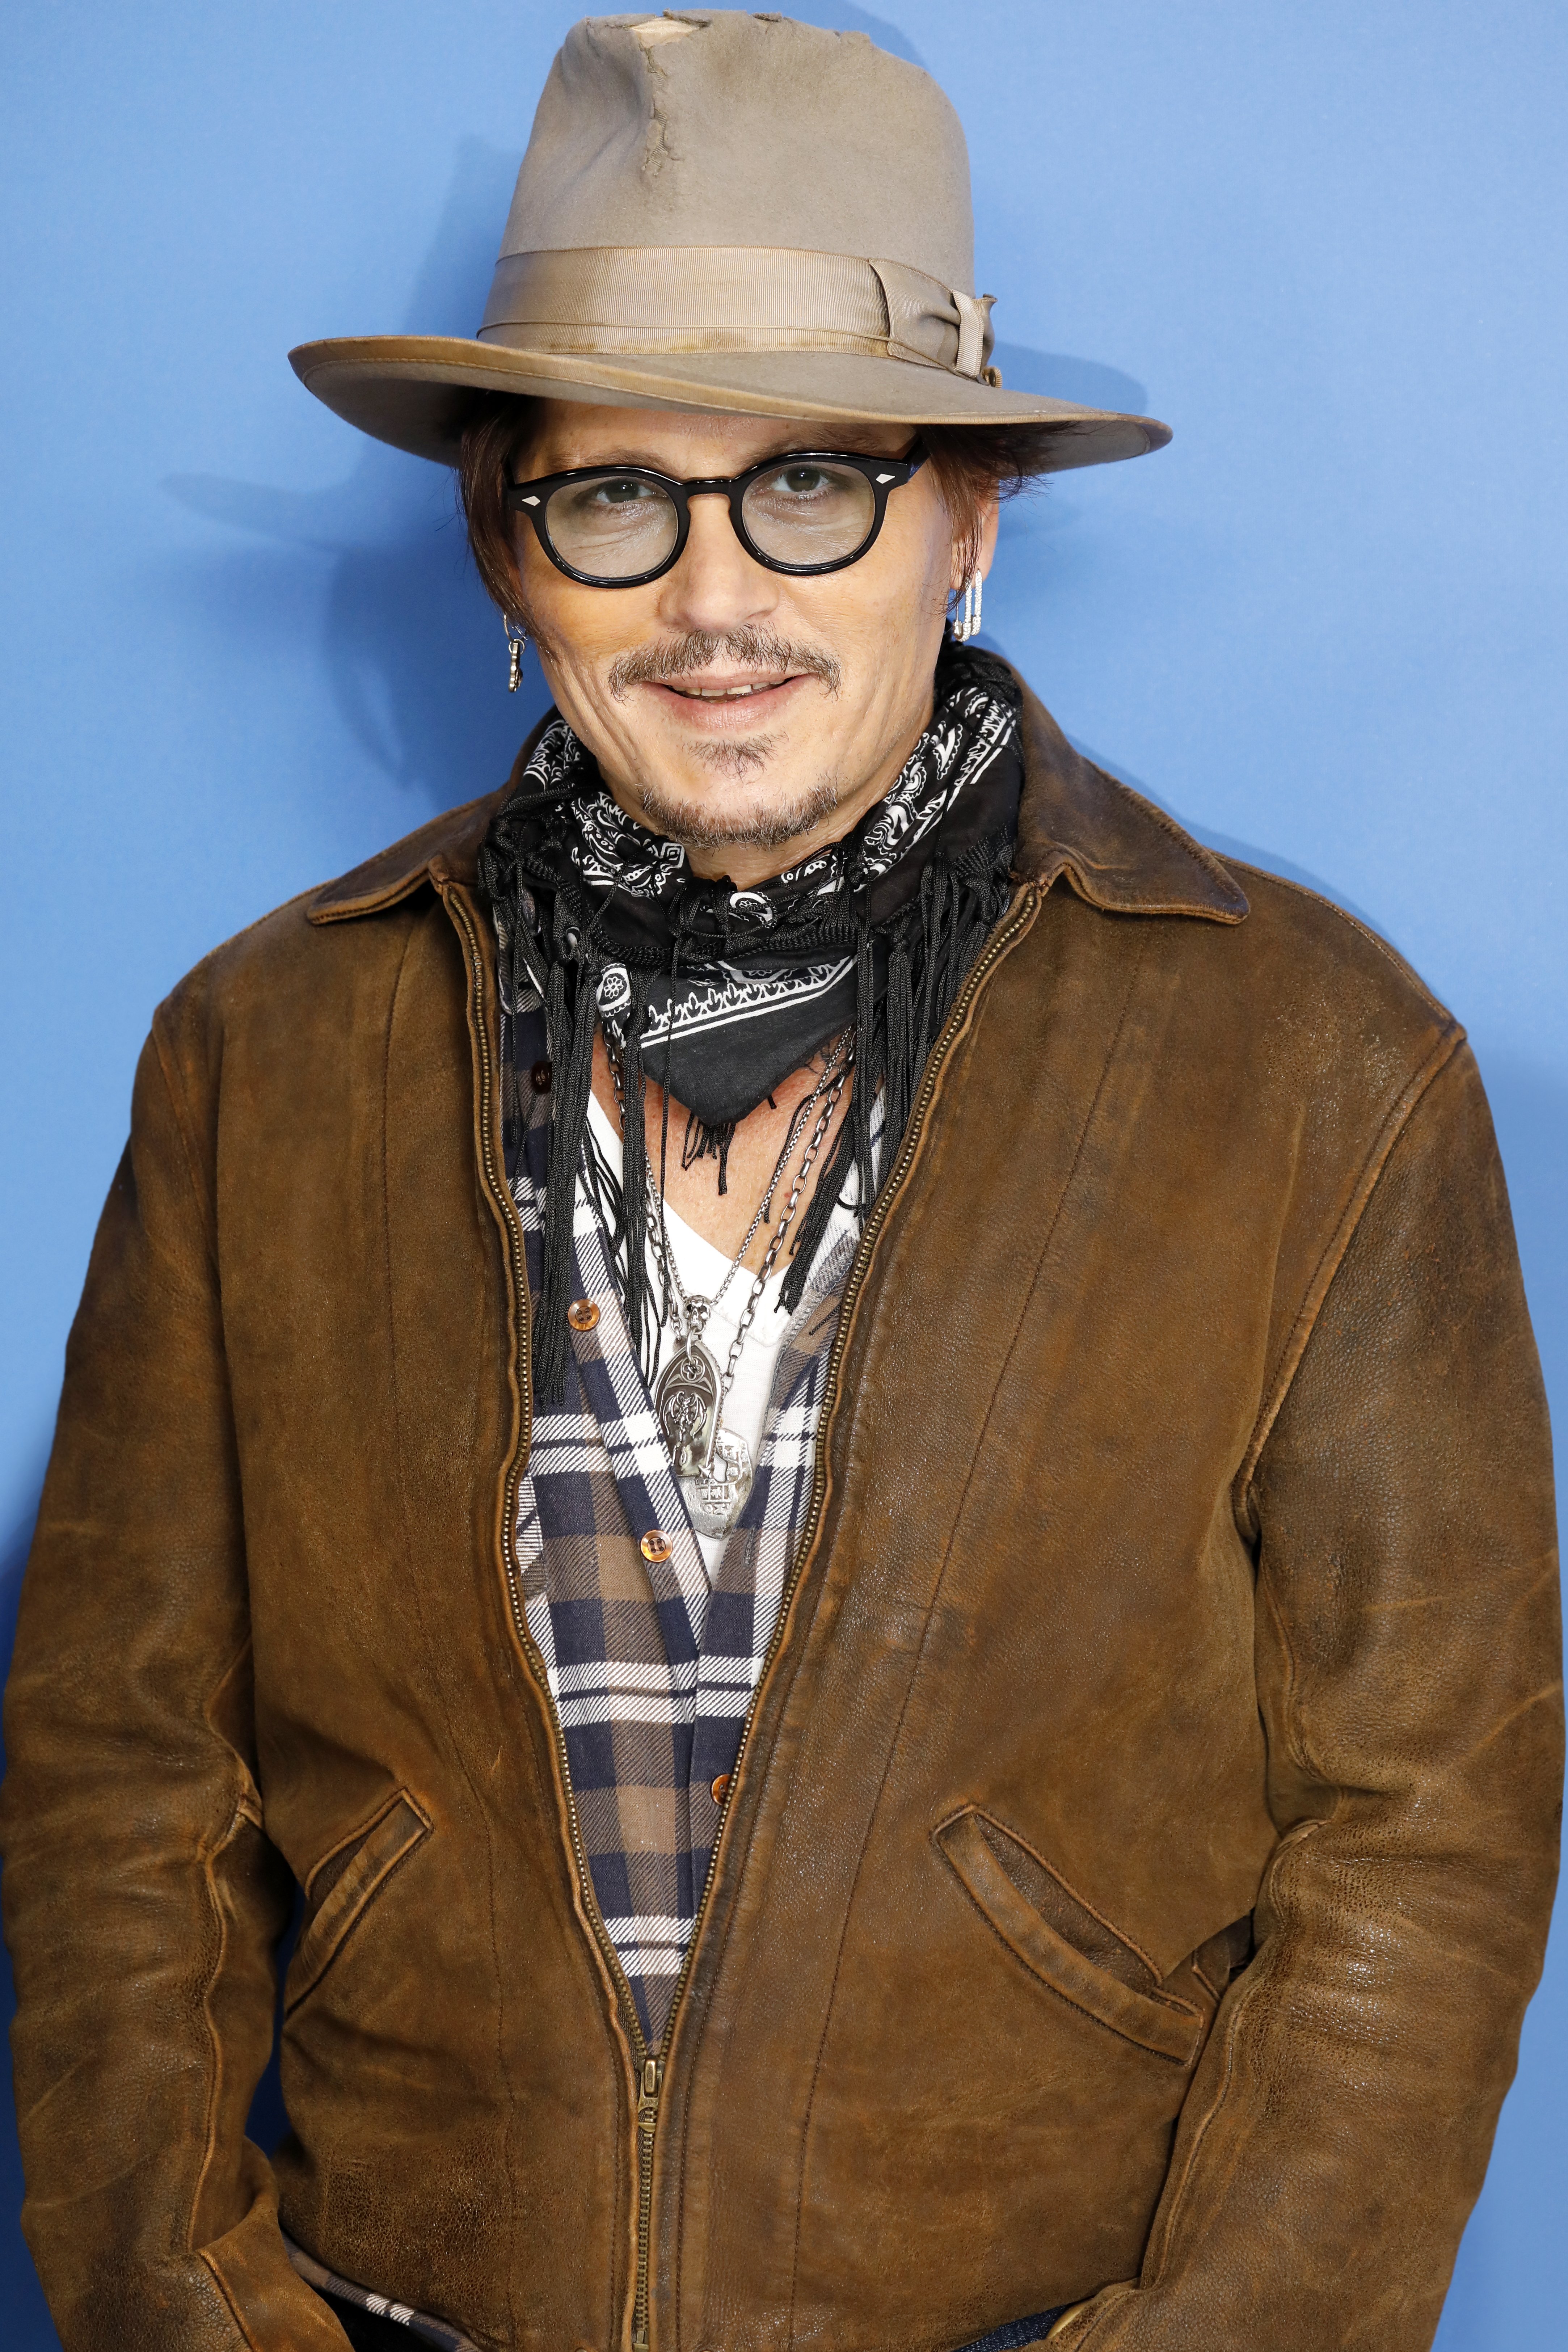 Johnny Depp attends the photocall for 'Minamata' at the Grand Hyatt Hotel during the 70th Berlin International Film Festival on February 21, 2020 in Berlin, Germany. | Source: Getty Images